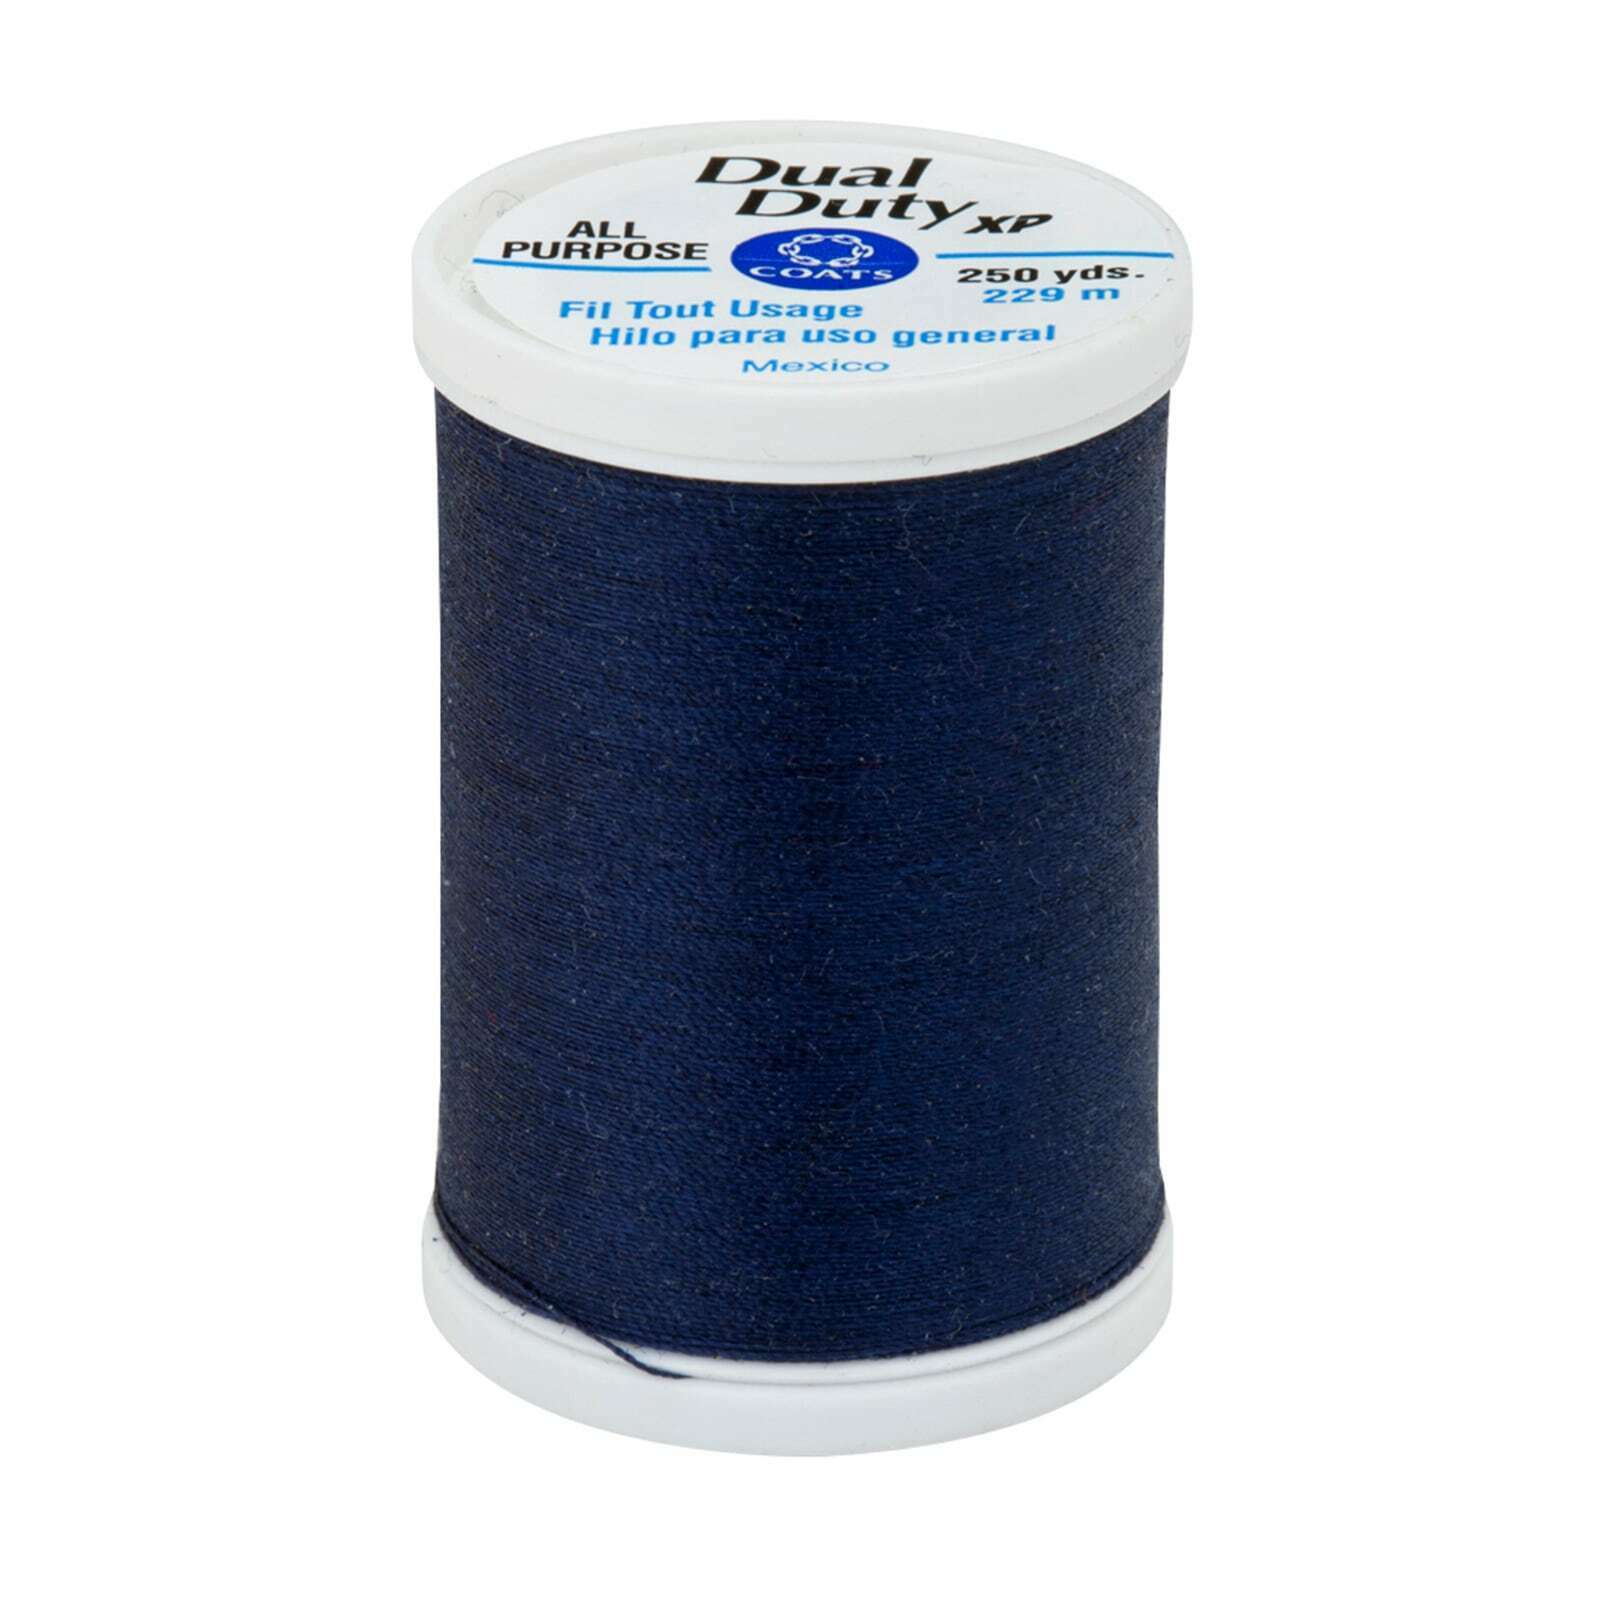 Quilting & Sewing Thread: New Coats & Clark All Purpose Dual Duty XP  Polyester Thread 250 Yards - My Blog